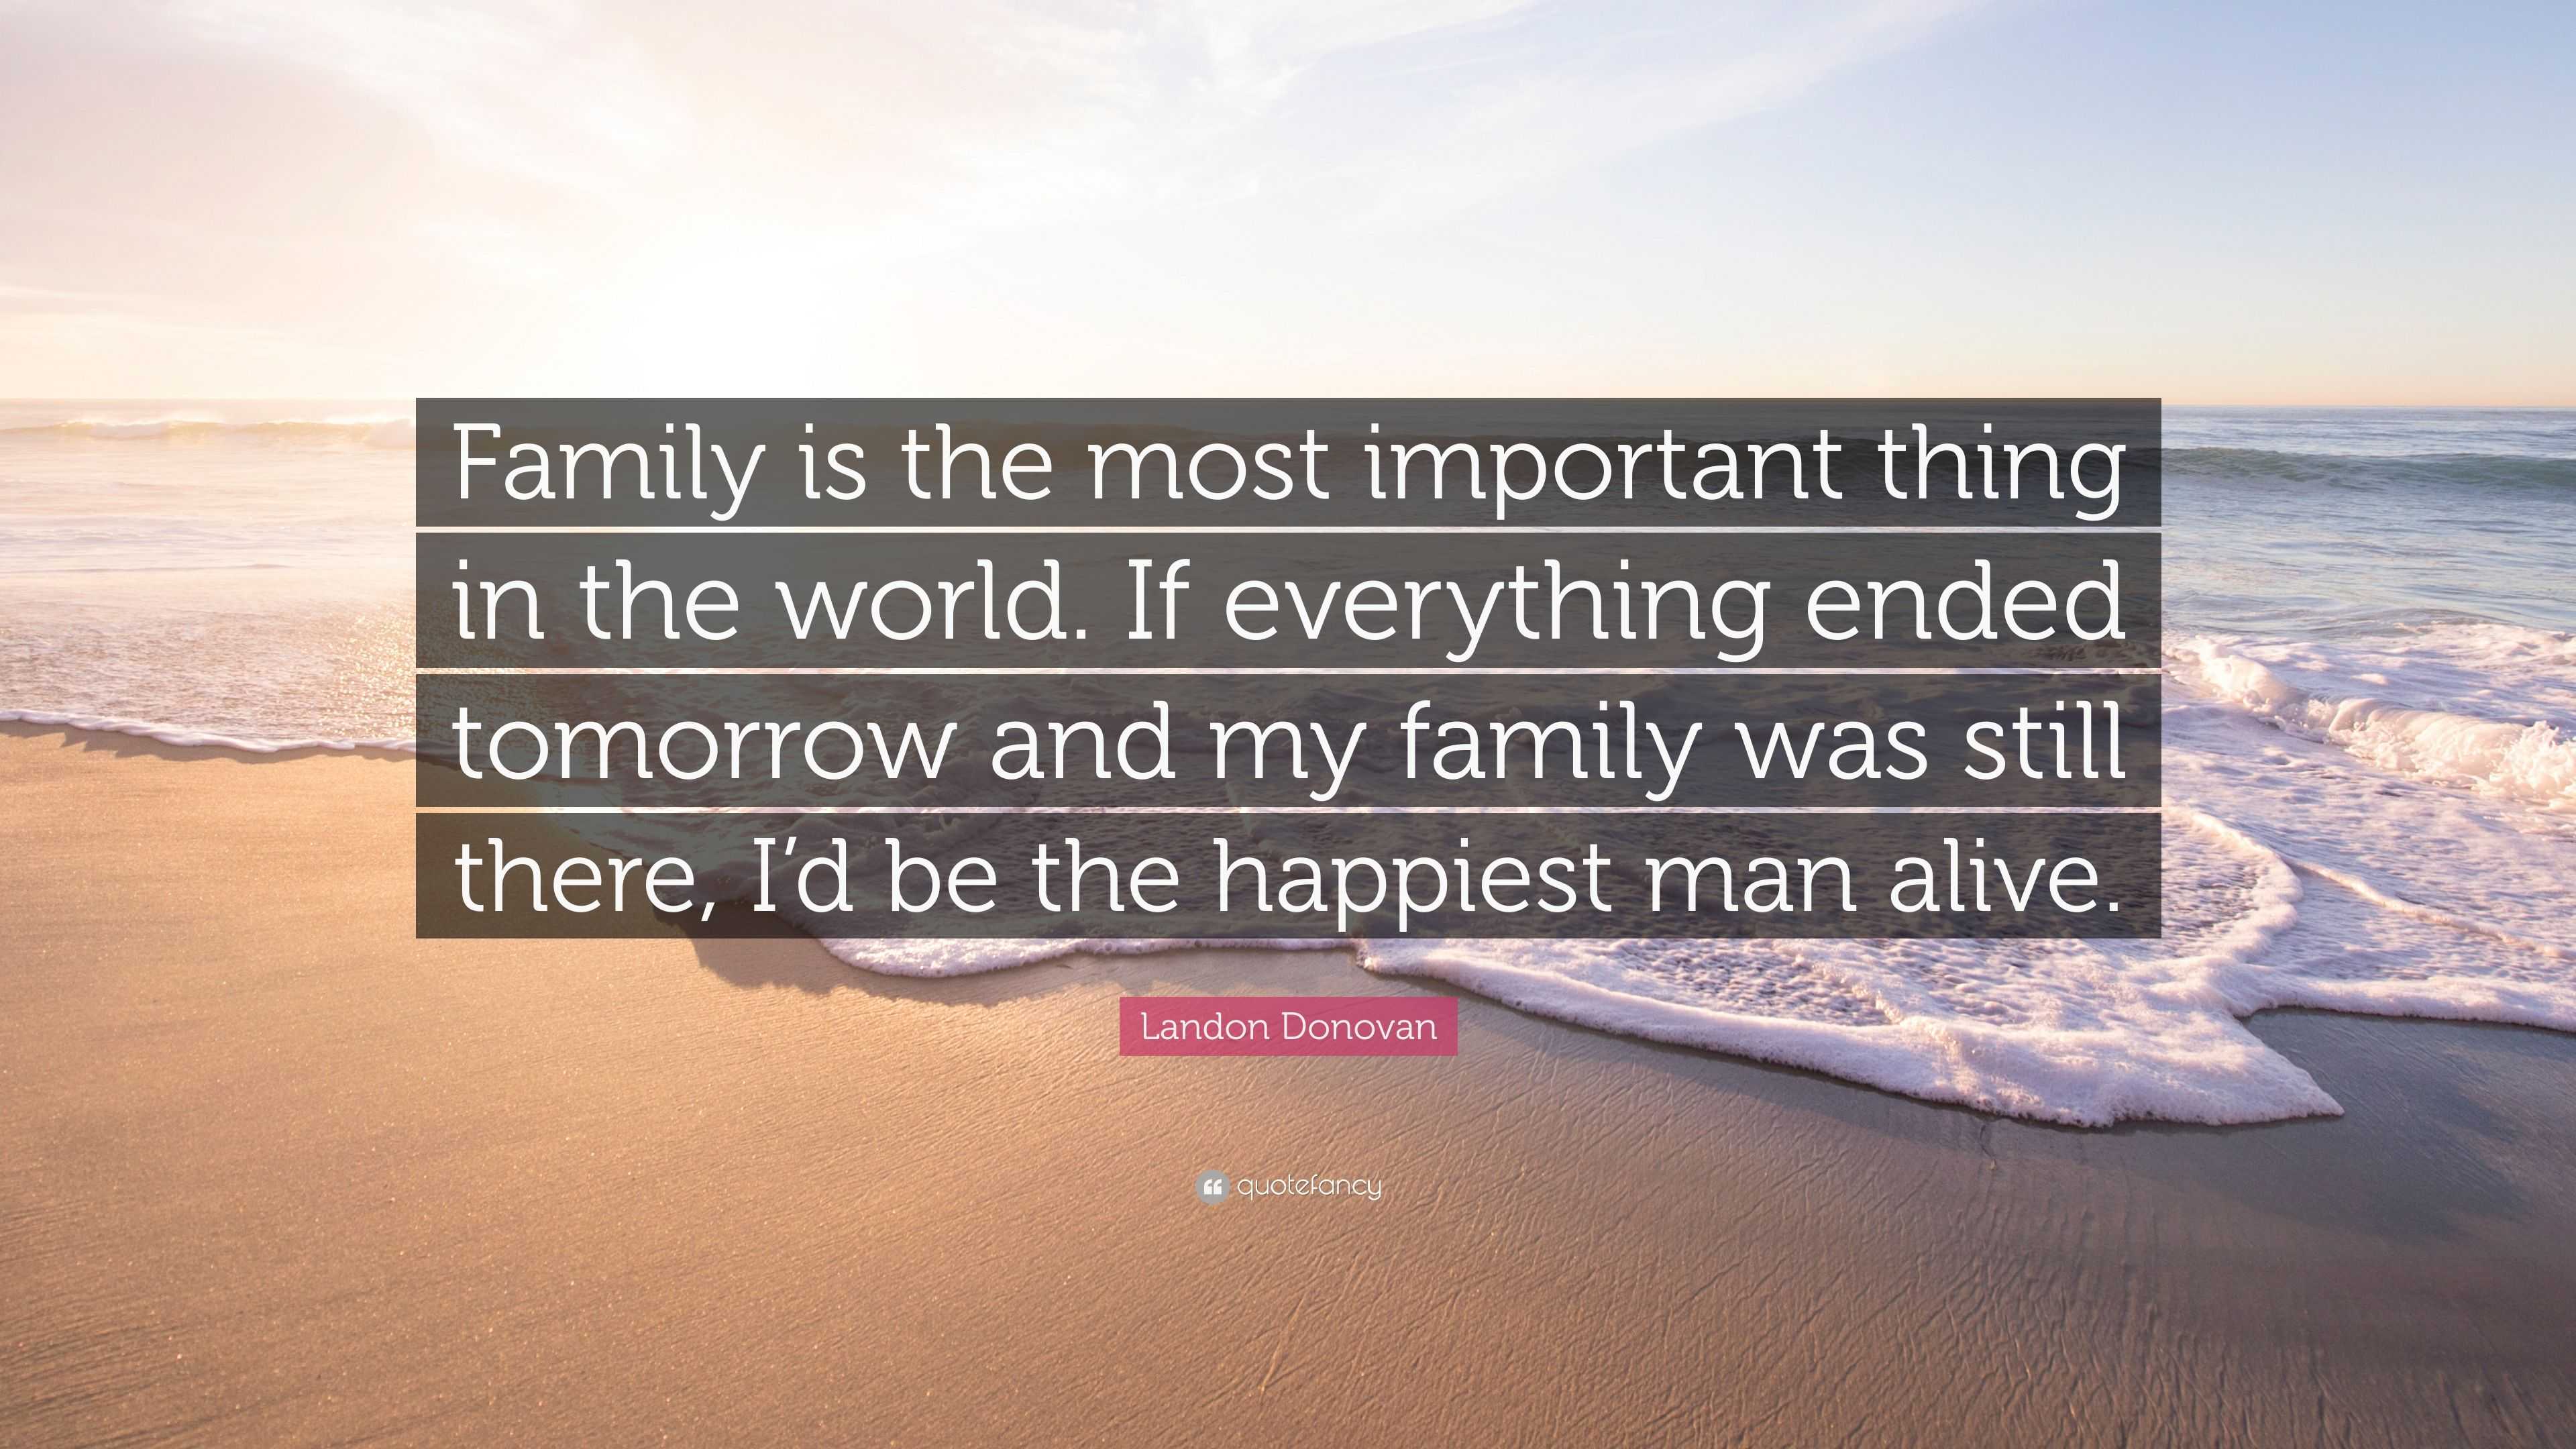 Landon Donovan Quote: “Family is the most important thing in the world ...